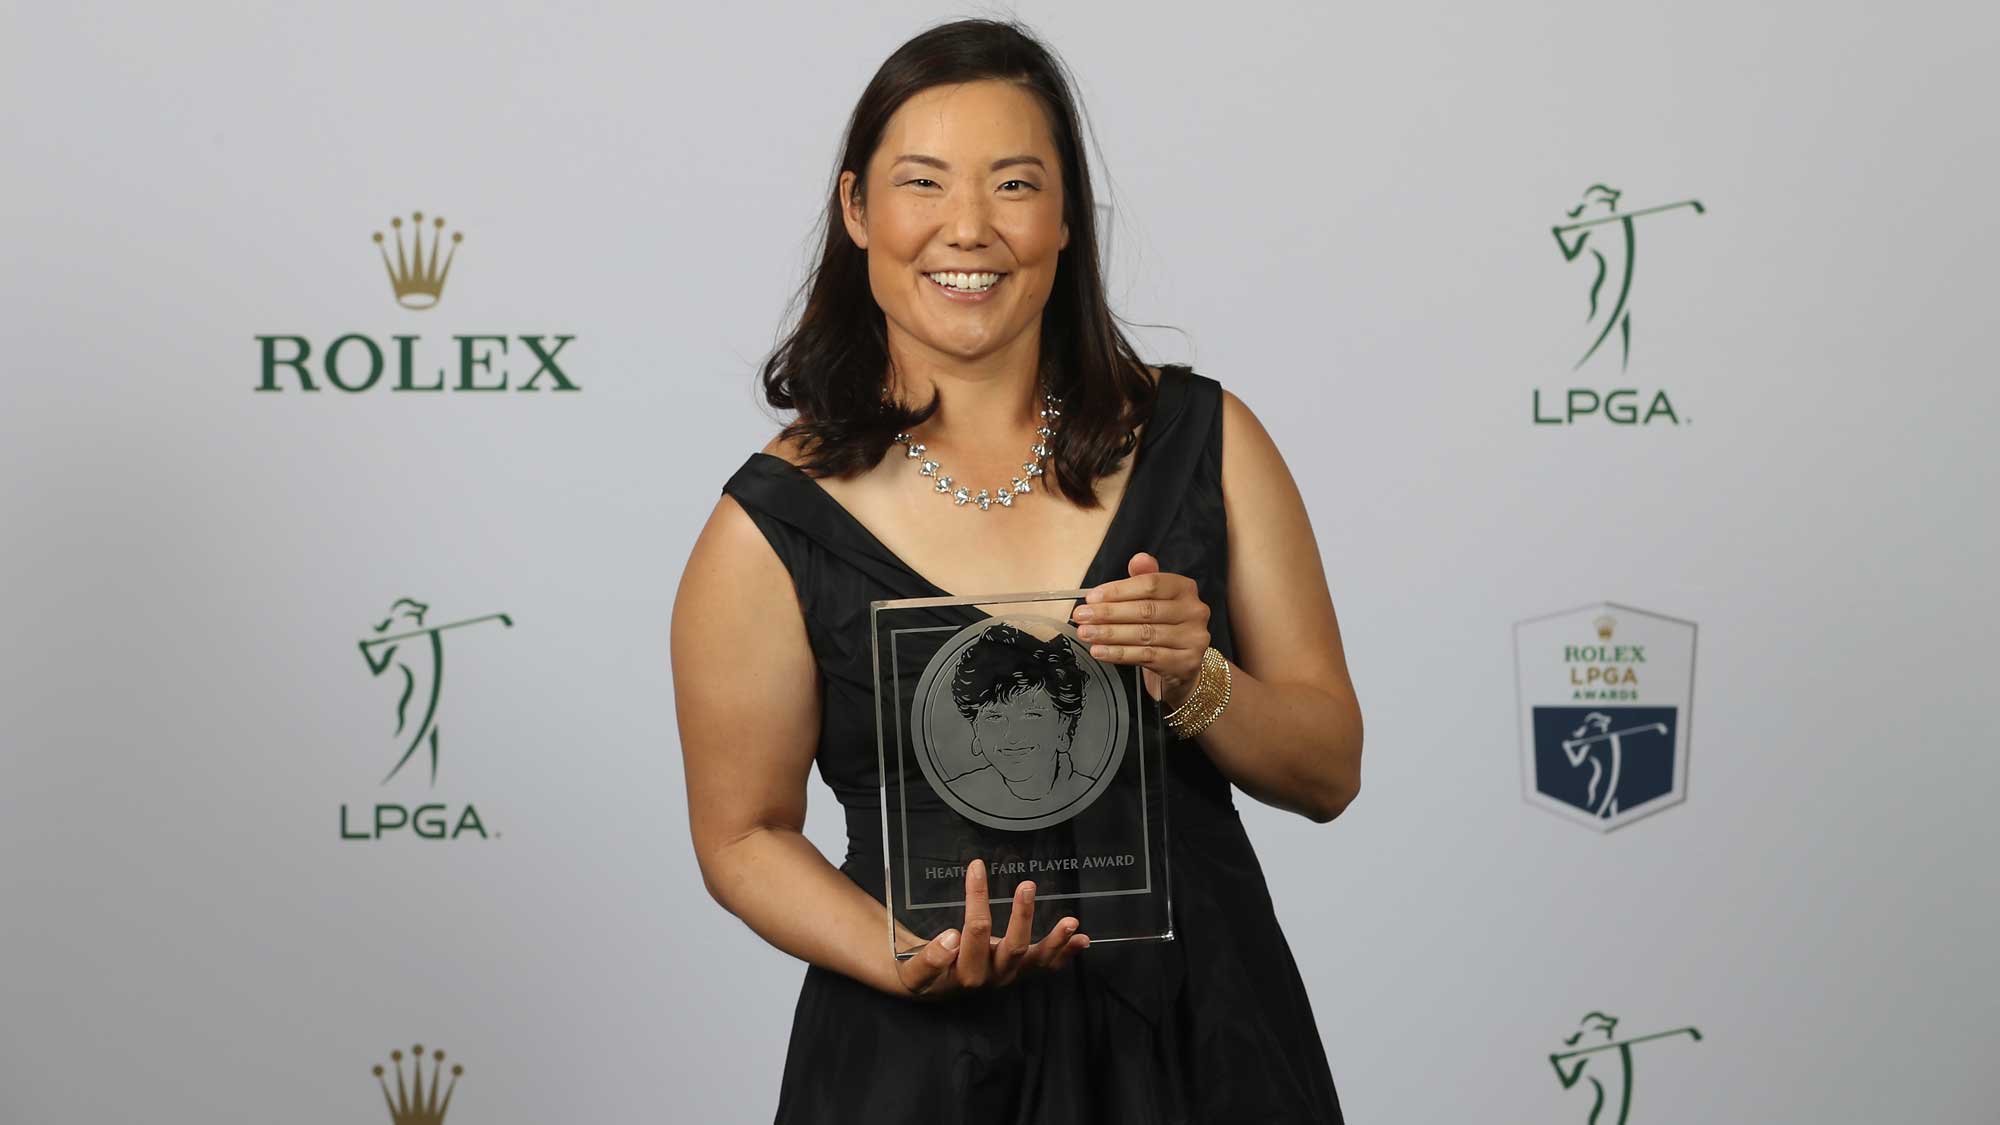 Heather Farr Perseverance Award recipient Tiffany Joh of the United States poses for a portrait during the LPGA Rolex Players Awards at The Ritz-Carlton Golf Resort